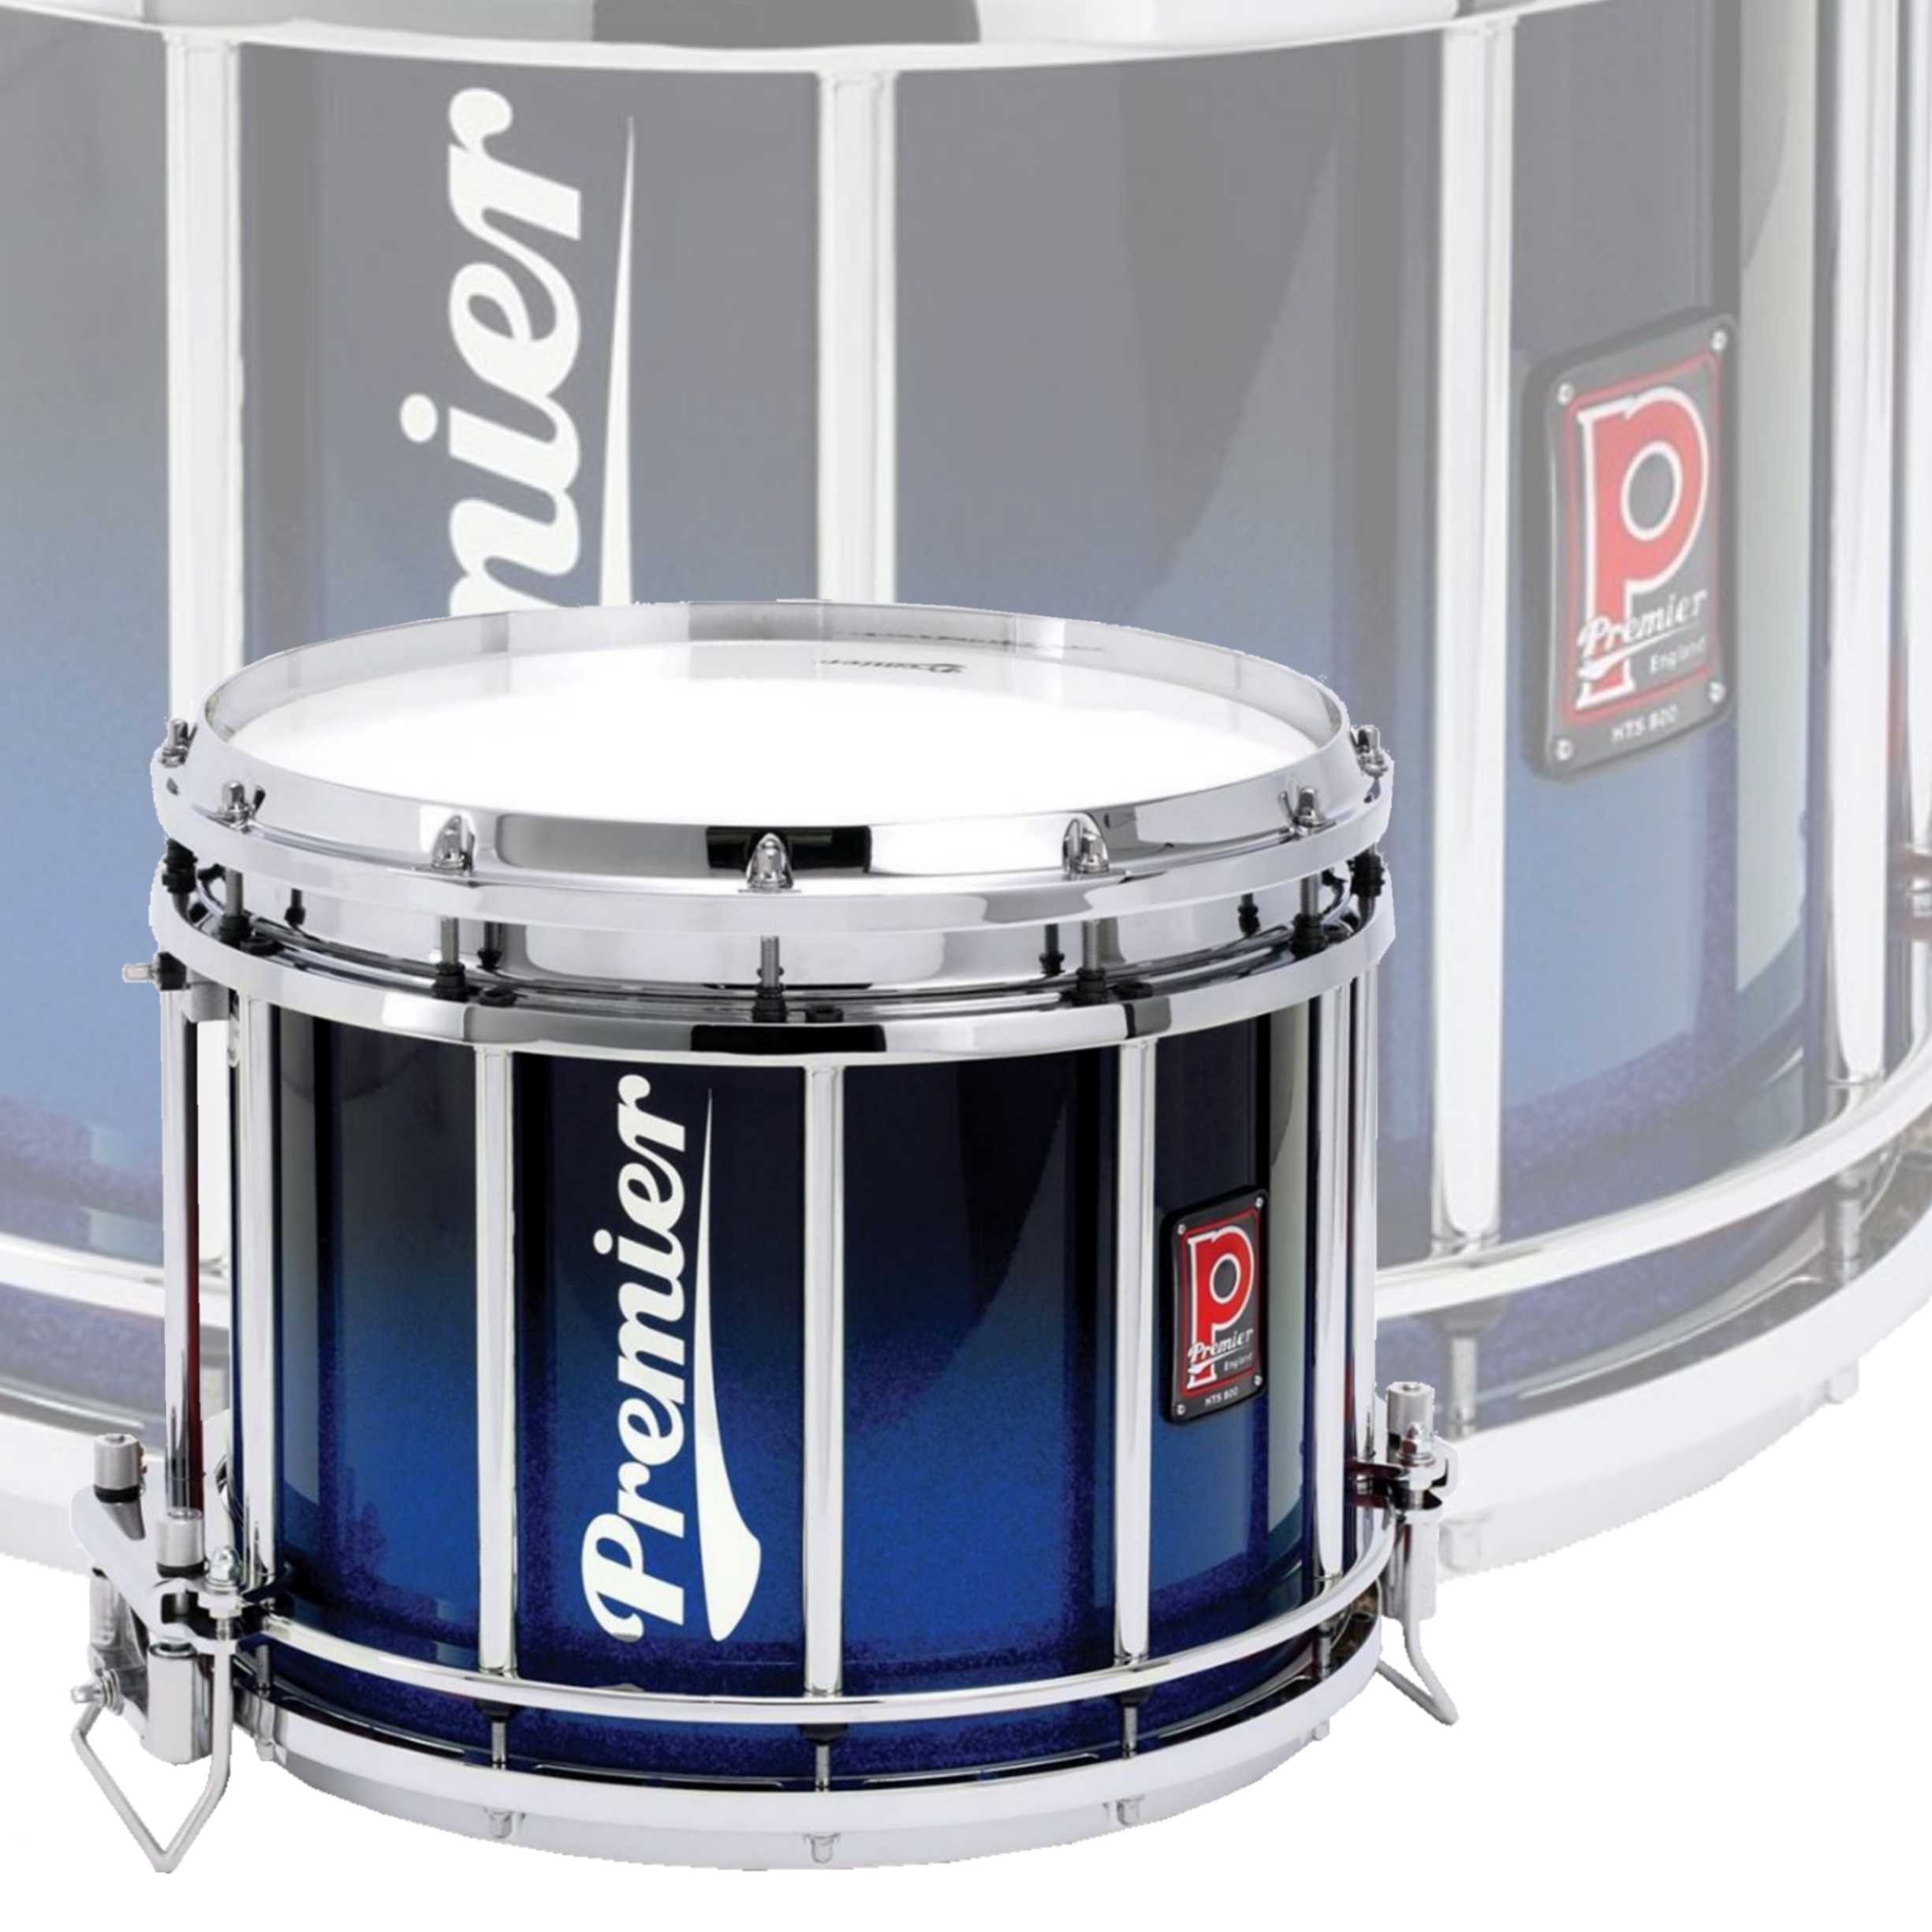 Premier Pipe Band HTS-0800SPX-C 14"x12" Side Snare Drum Sapphire Sparkle Fade - Chrome